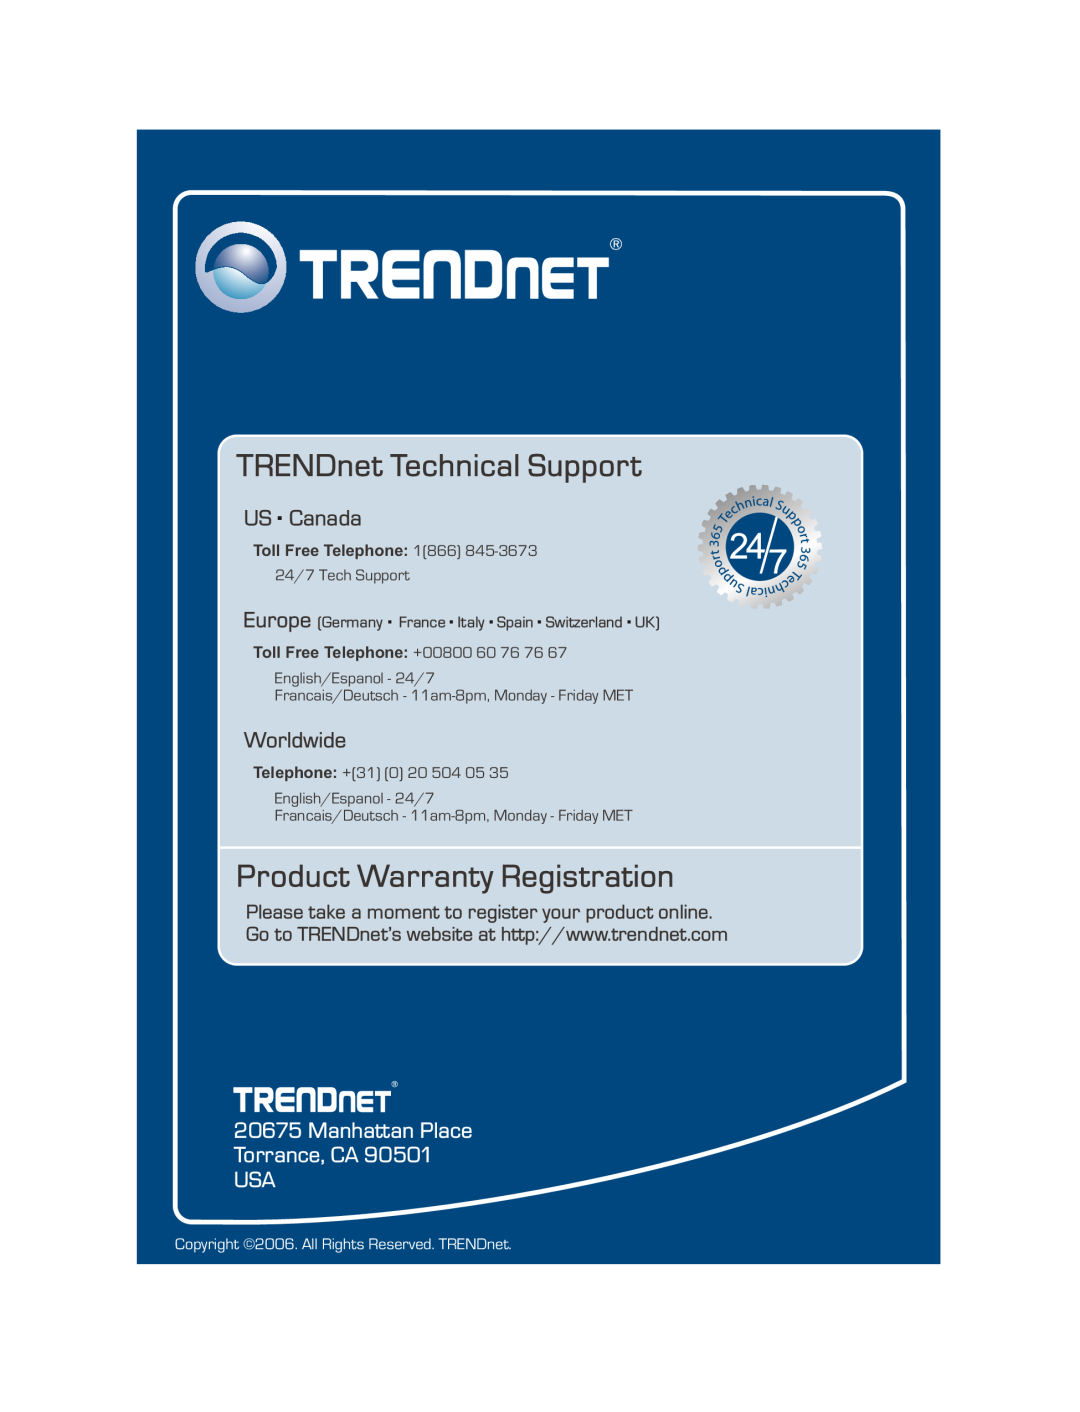 TRENDnet TEG-160WS TRENDnet Technical Support, Product Warranty Registration, US . Canada, Worldwide, Toll Free Telephone 